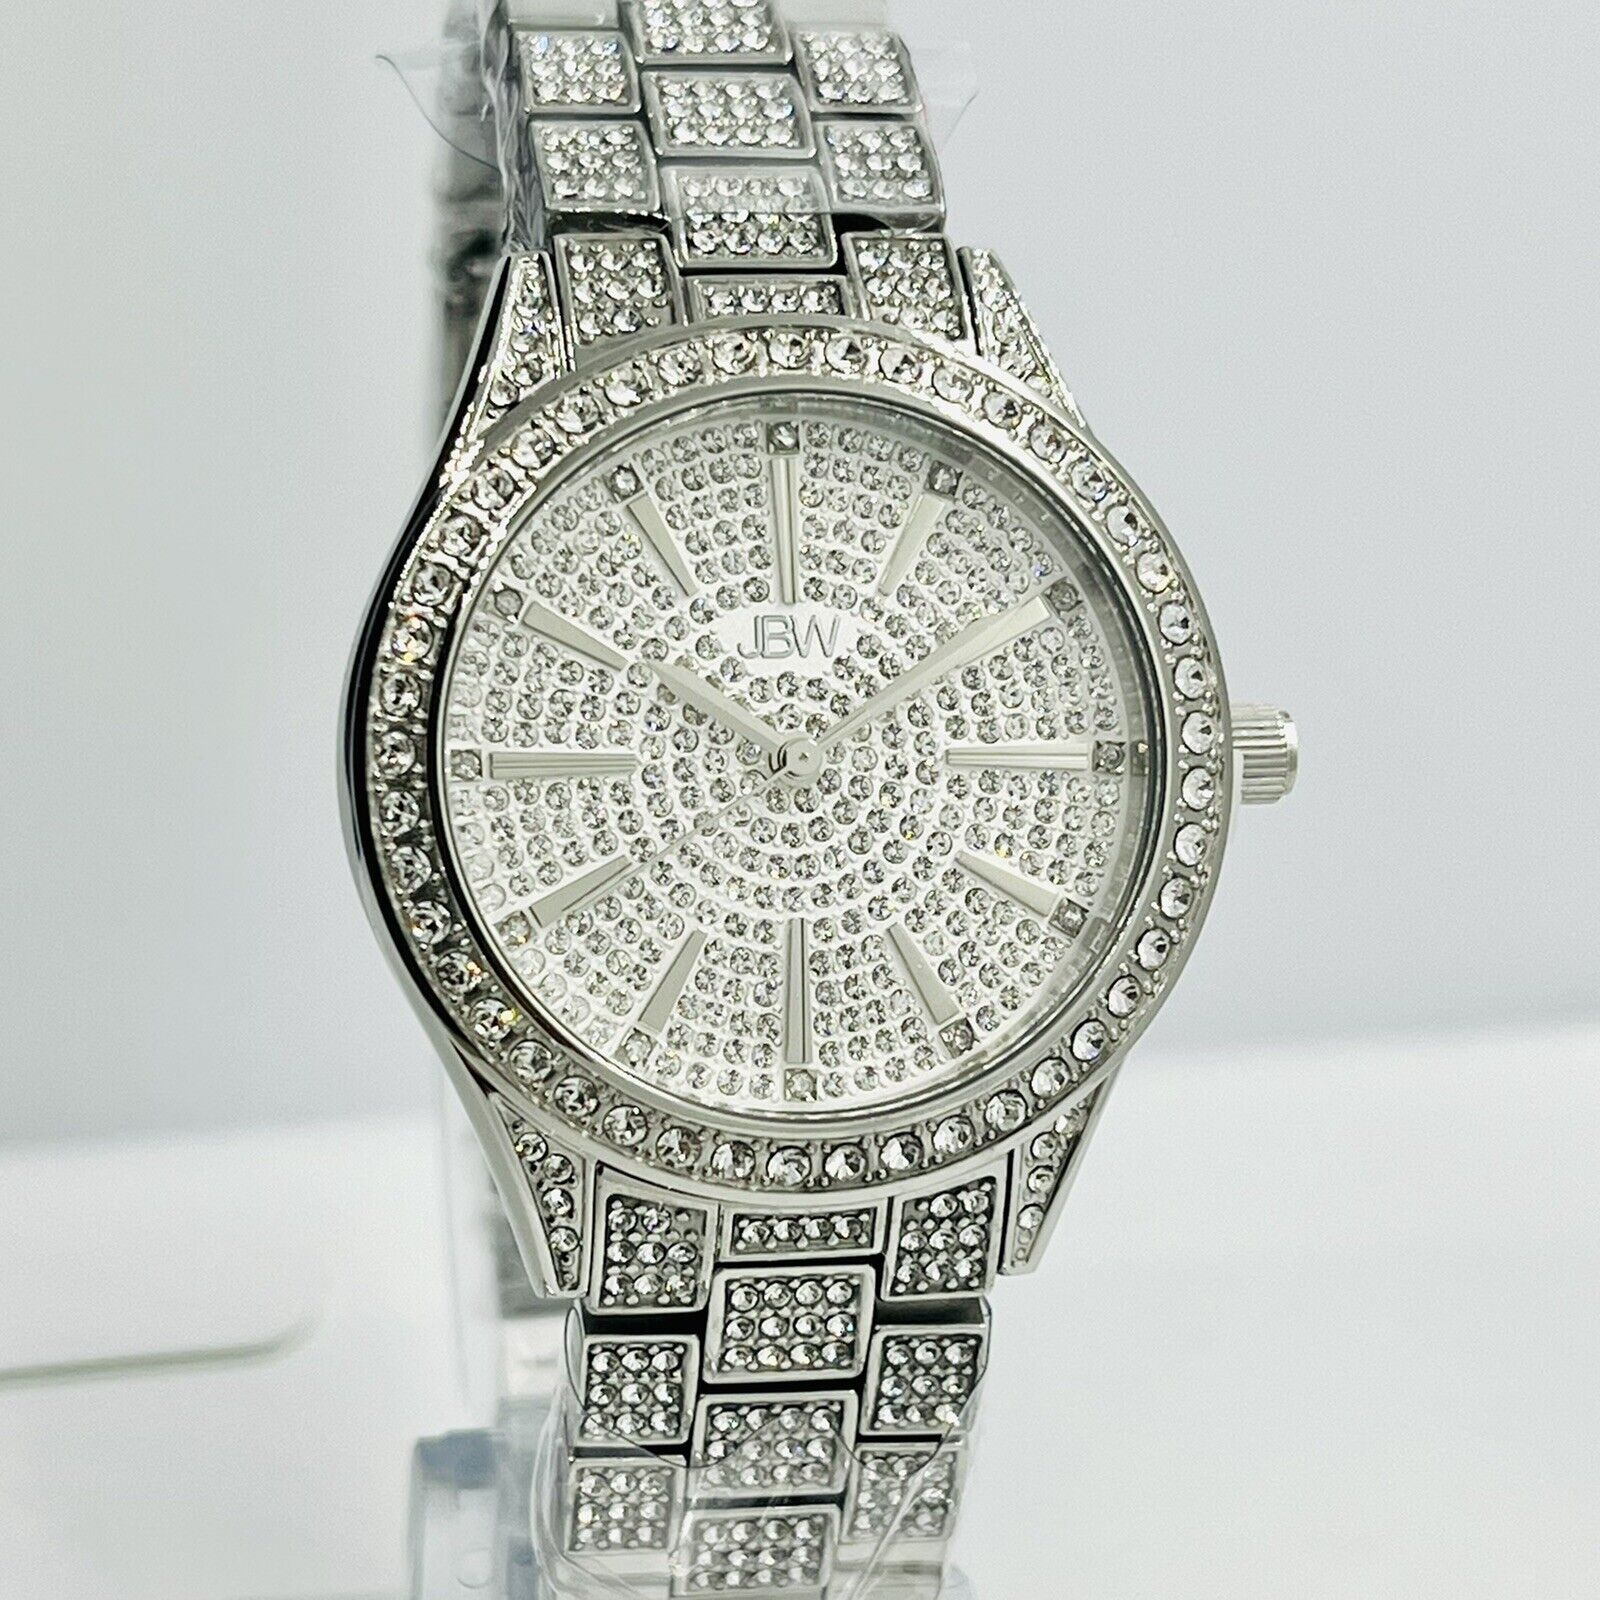 JBW J6383C Cristal 1/8 CT. T.W. Diamond and Crystal Accent Women's 34mm Watch